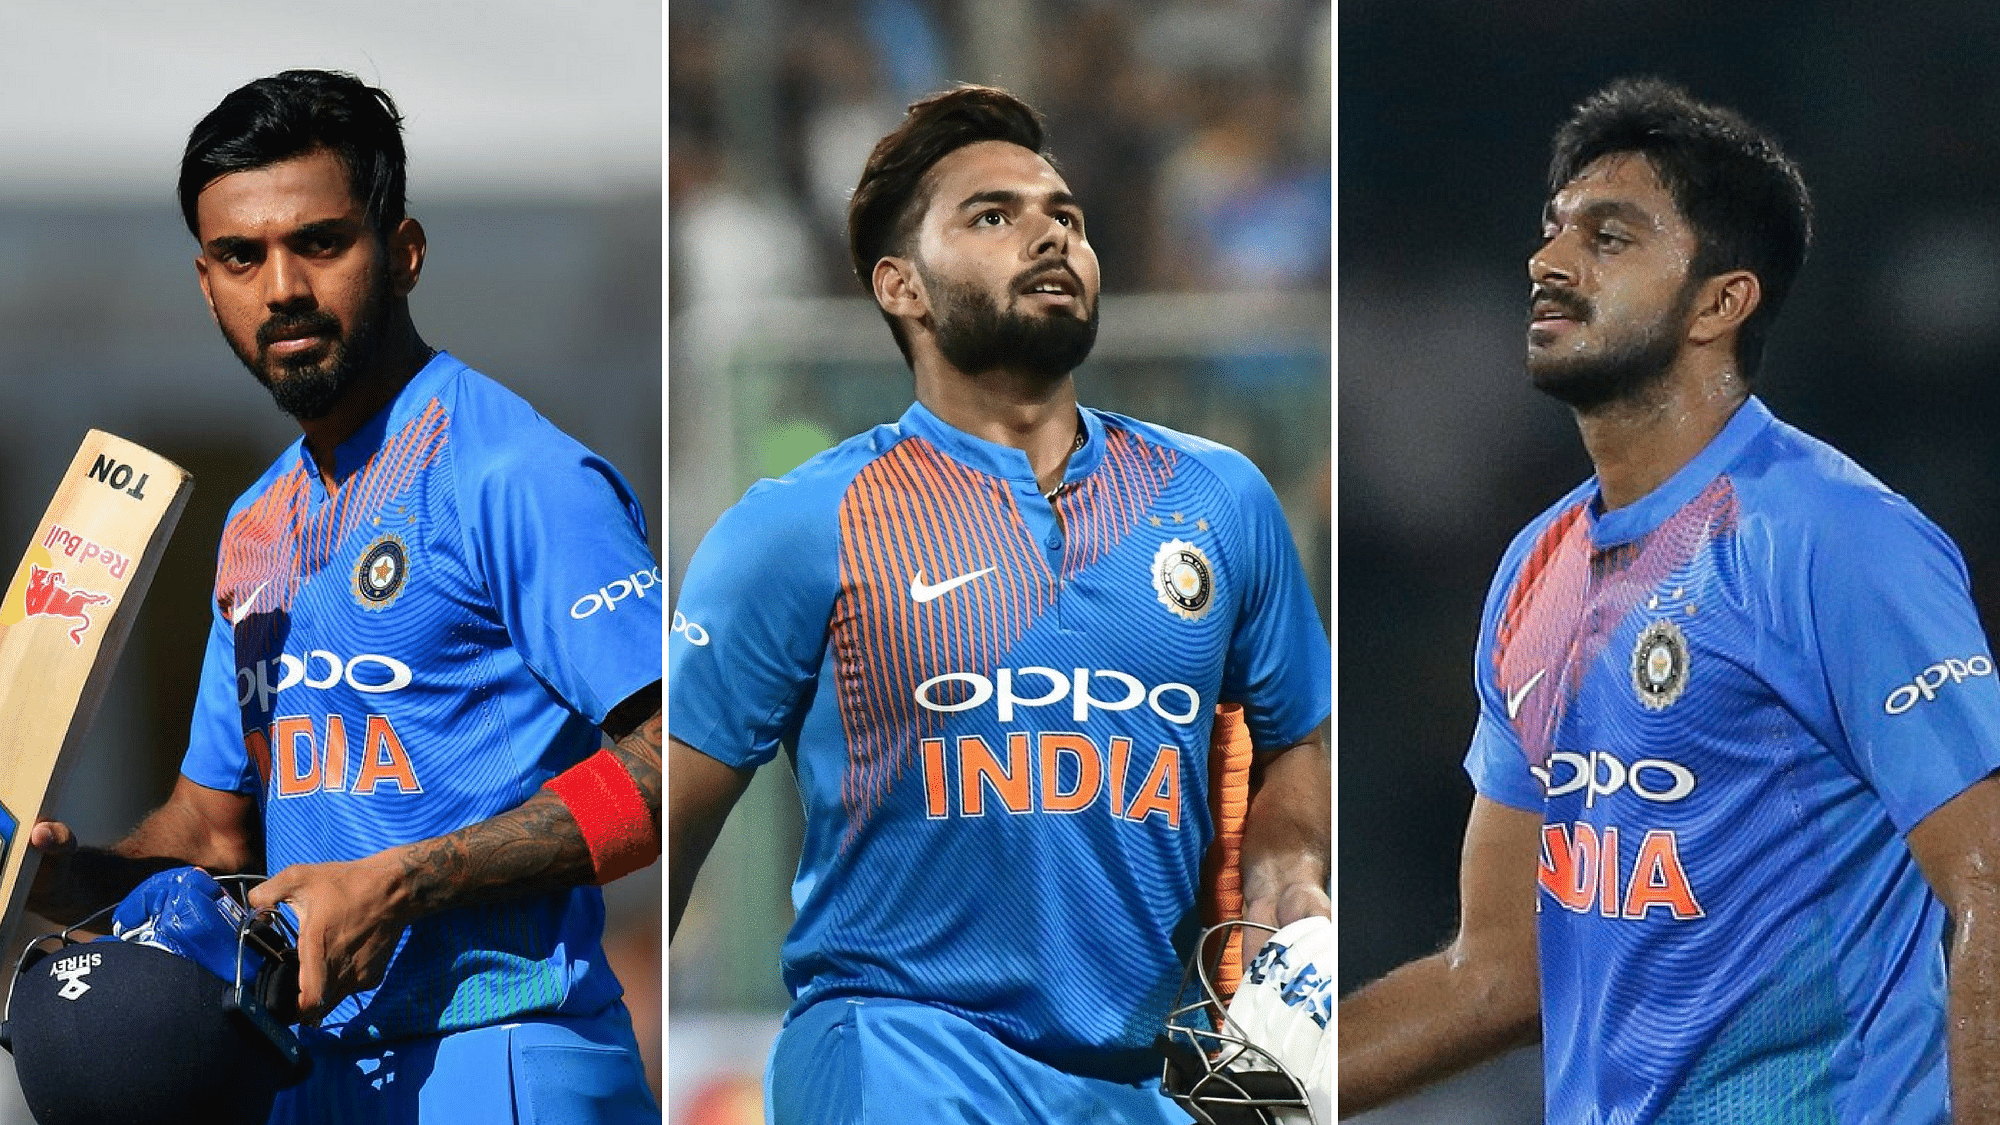 KL Rahul, Rishabh Pant and Vijay Shankar’s performances in this series were under the scanner ahead of India’s World Cup squad selection.